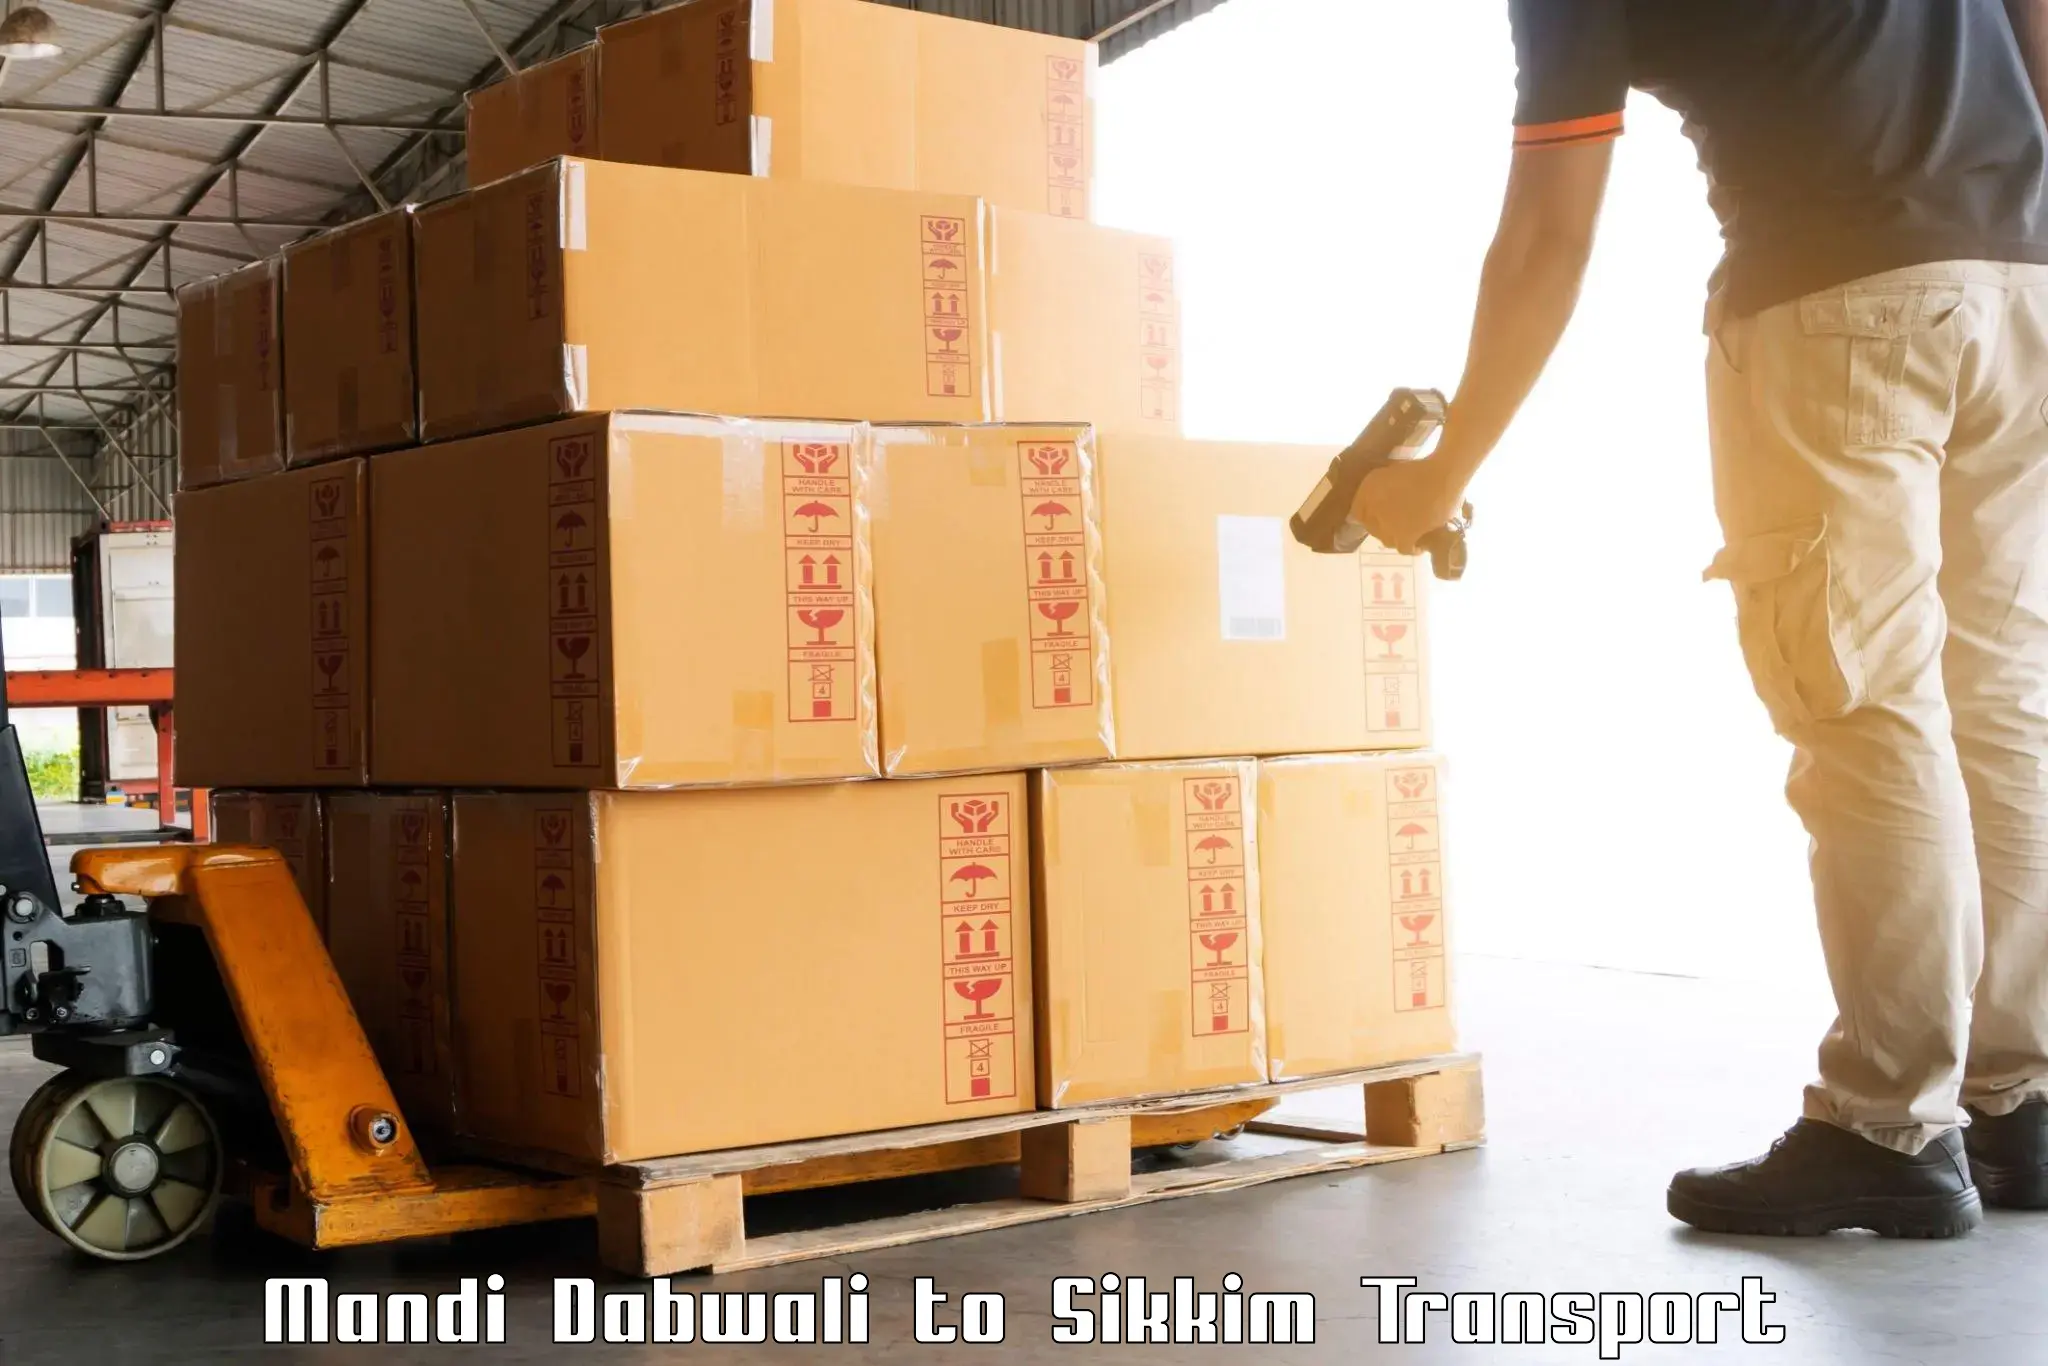 Goods transport services in Mandi Dabwali to Gangtok